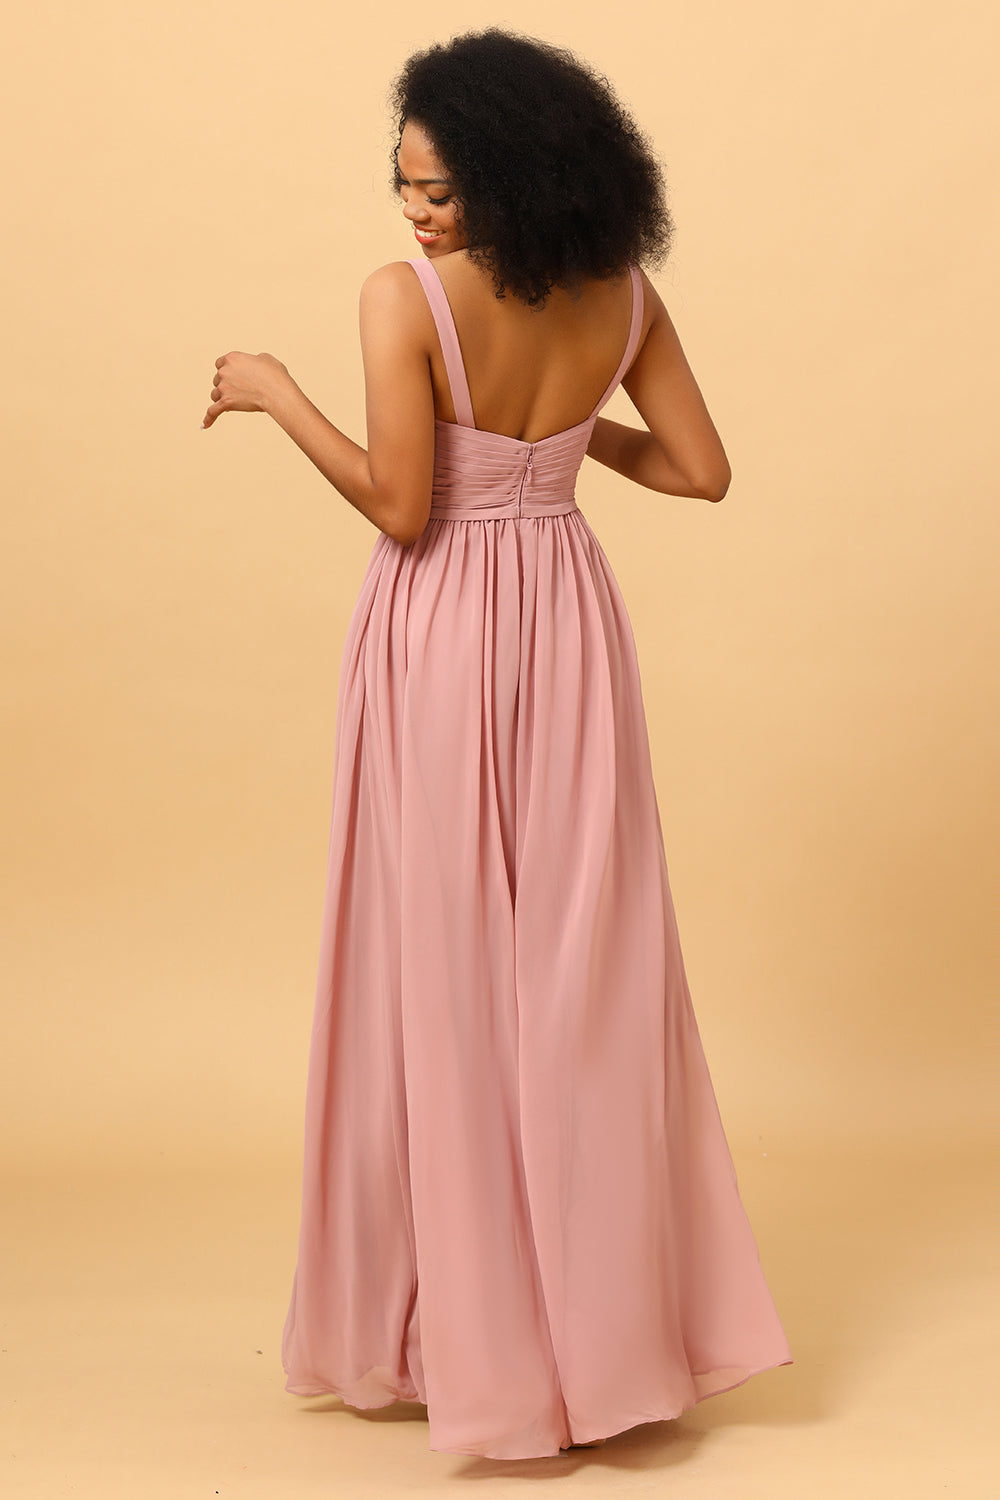 Beautiful A Line Blush Long Bridesmaid Dress with Split Front